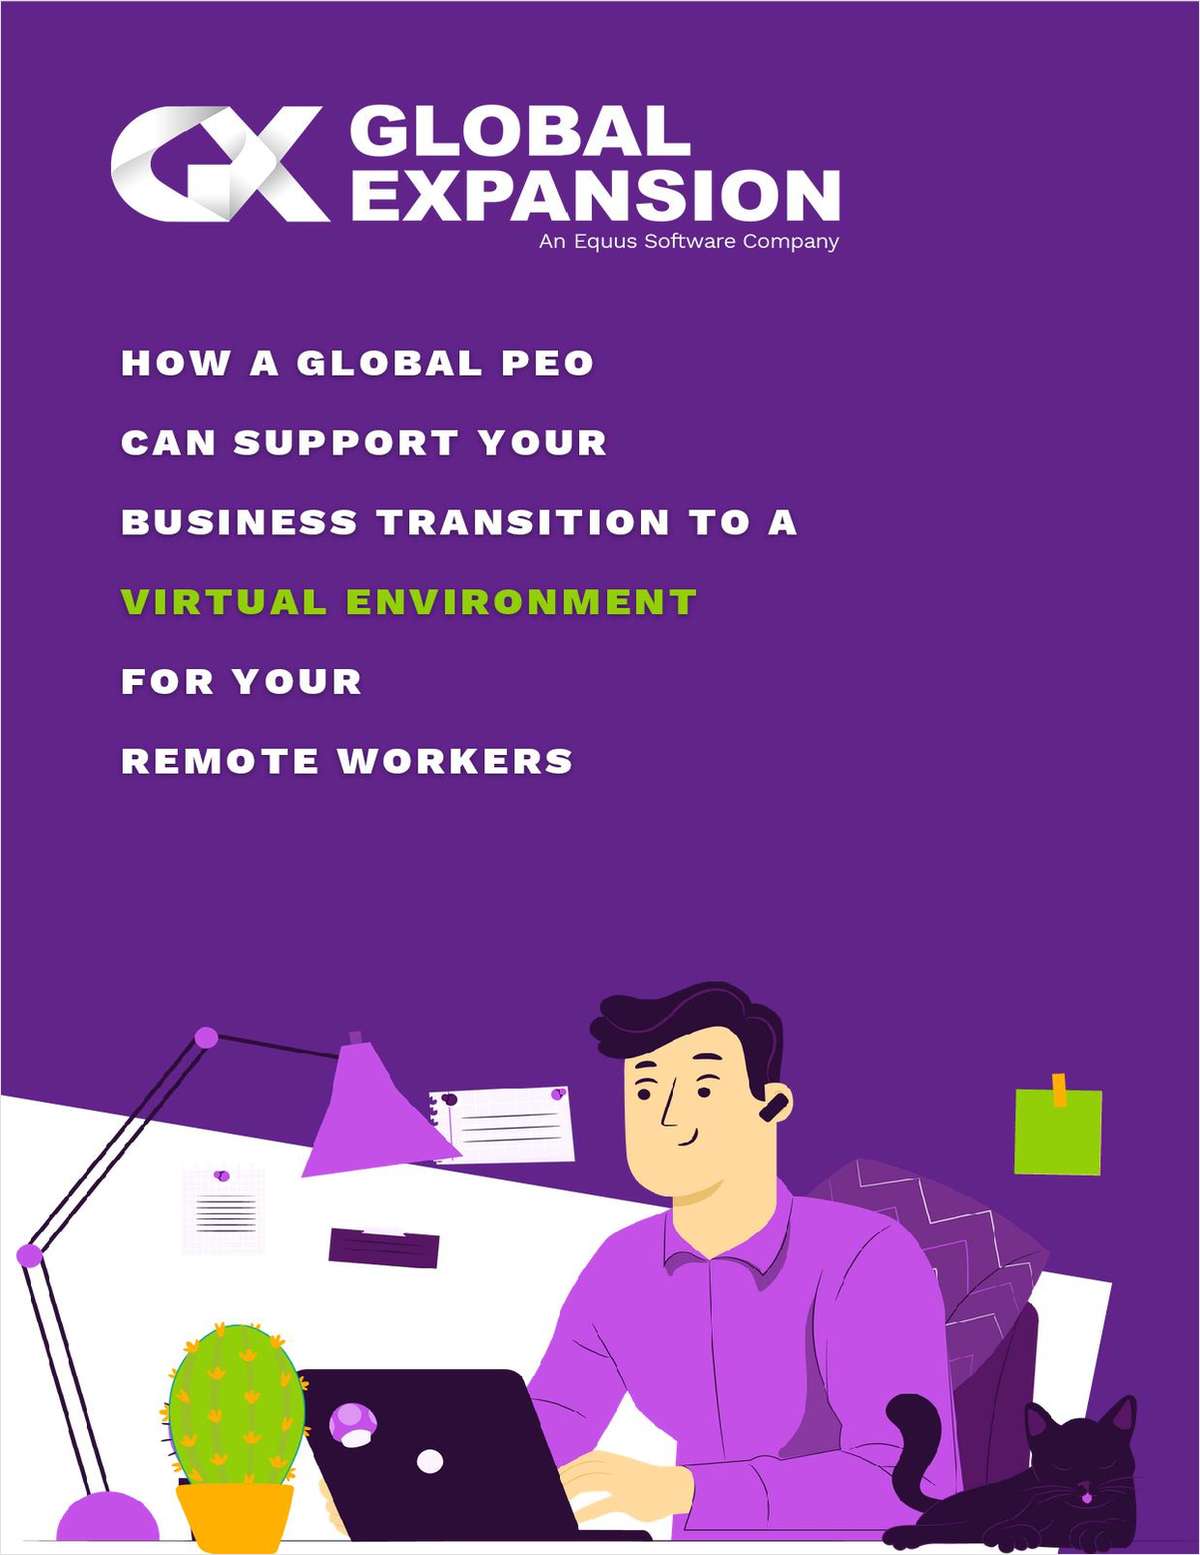 How A Global PEO Can Support Your Business Transition To A Virtual Environment For Your Remote Workers